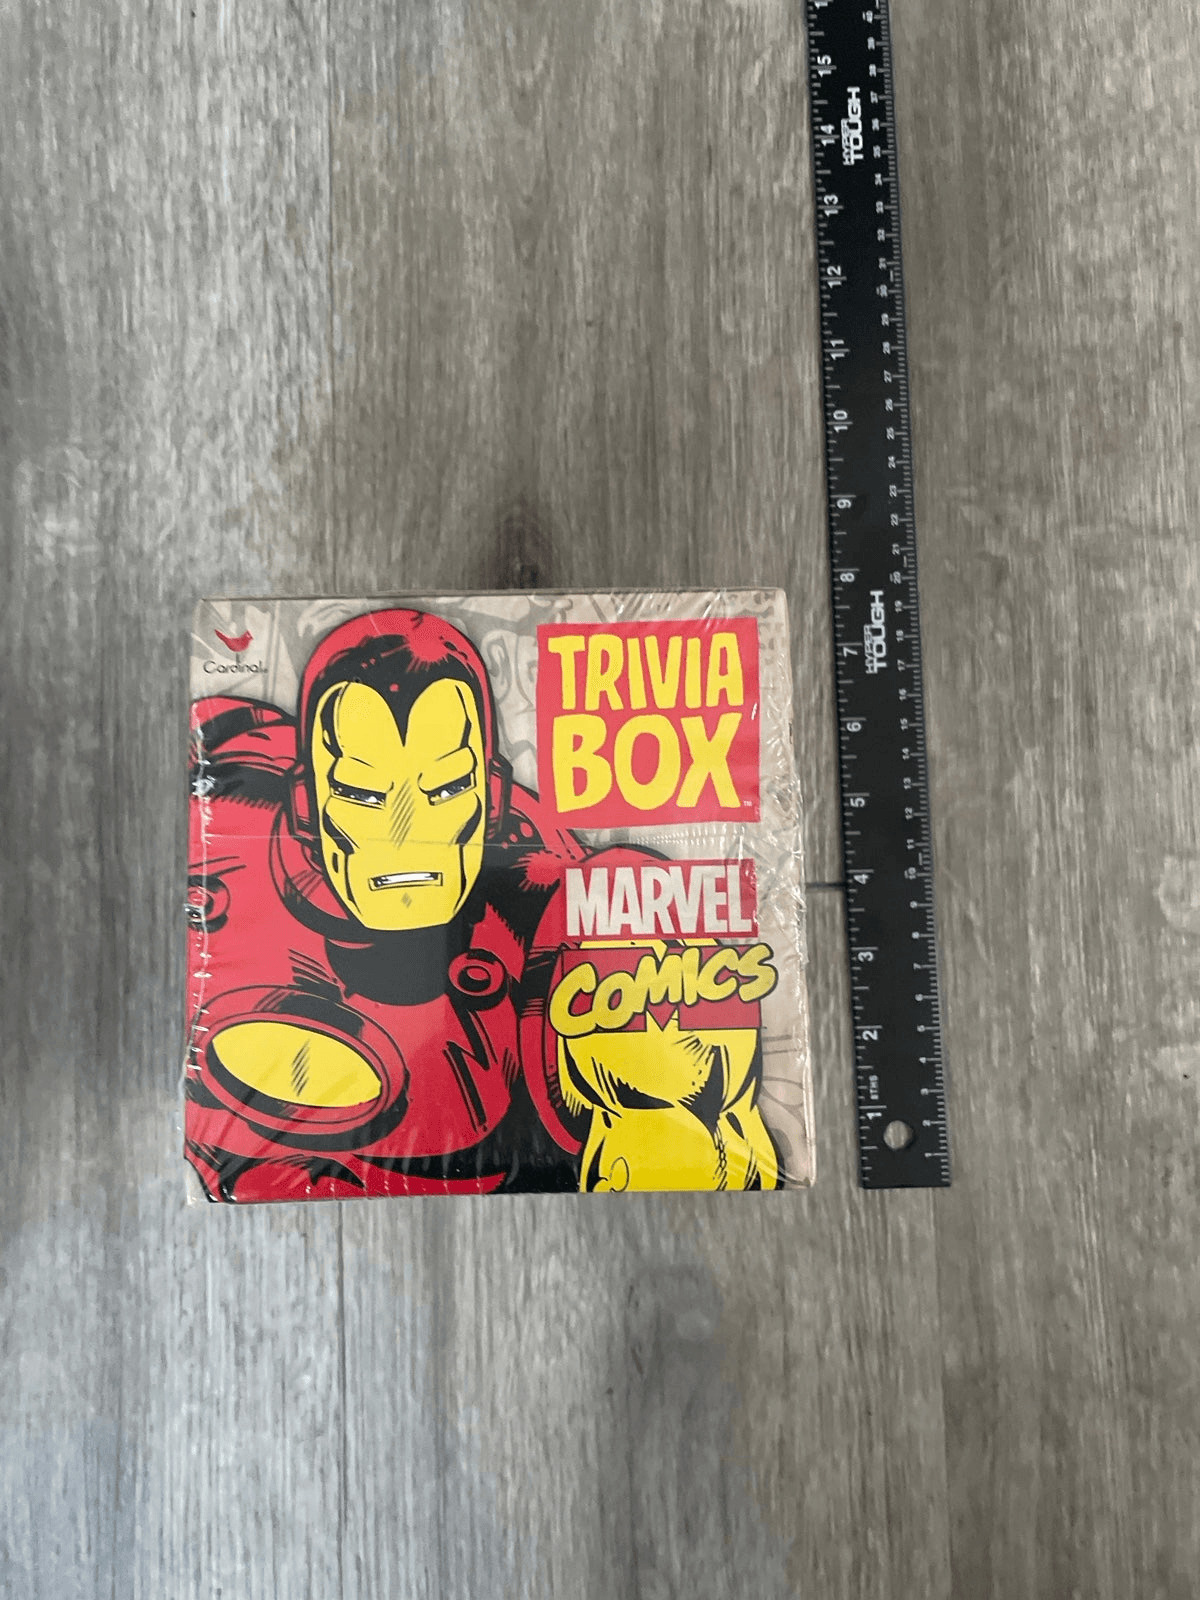 Cardinal Industries Marvel Comic Trivia Box Sealed and Complete